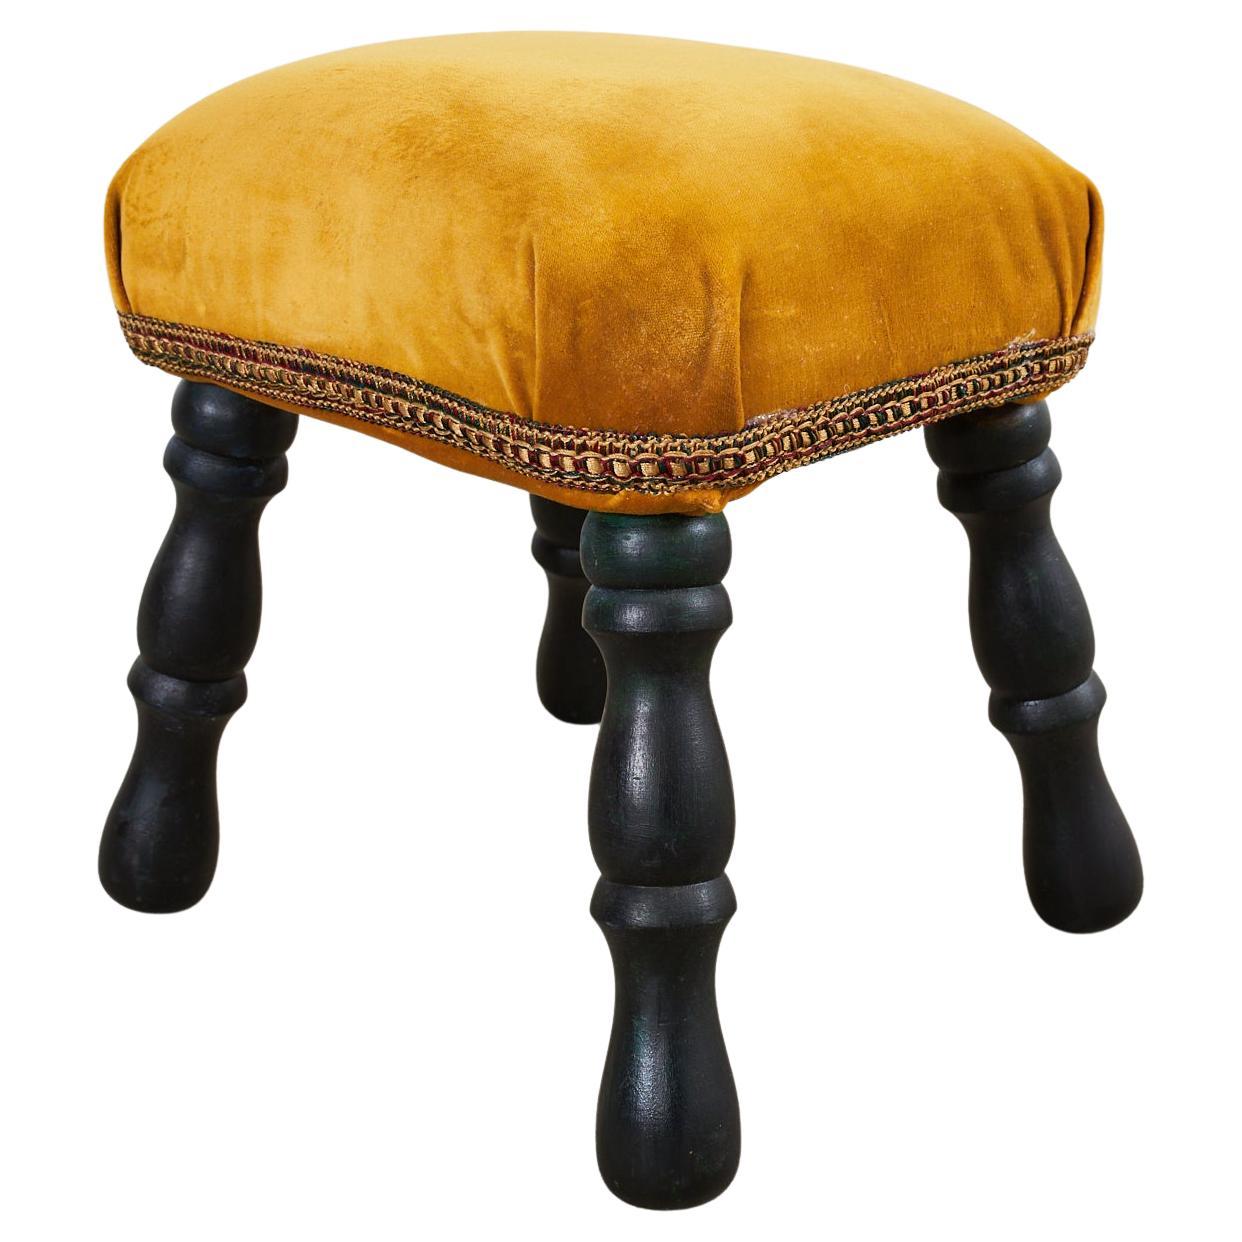 Late 20th Century English Ebonized and Upholstered Footstool with